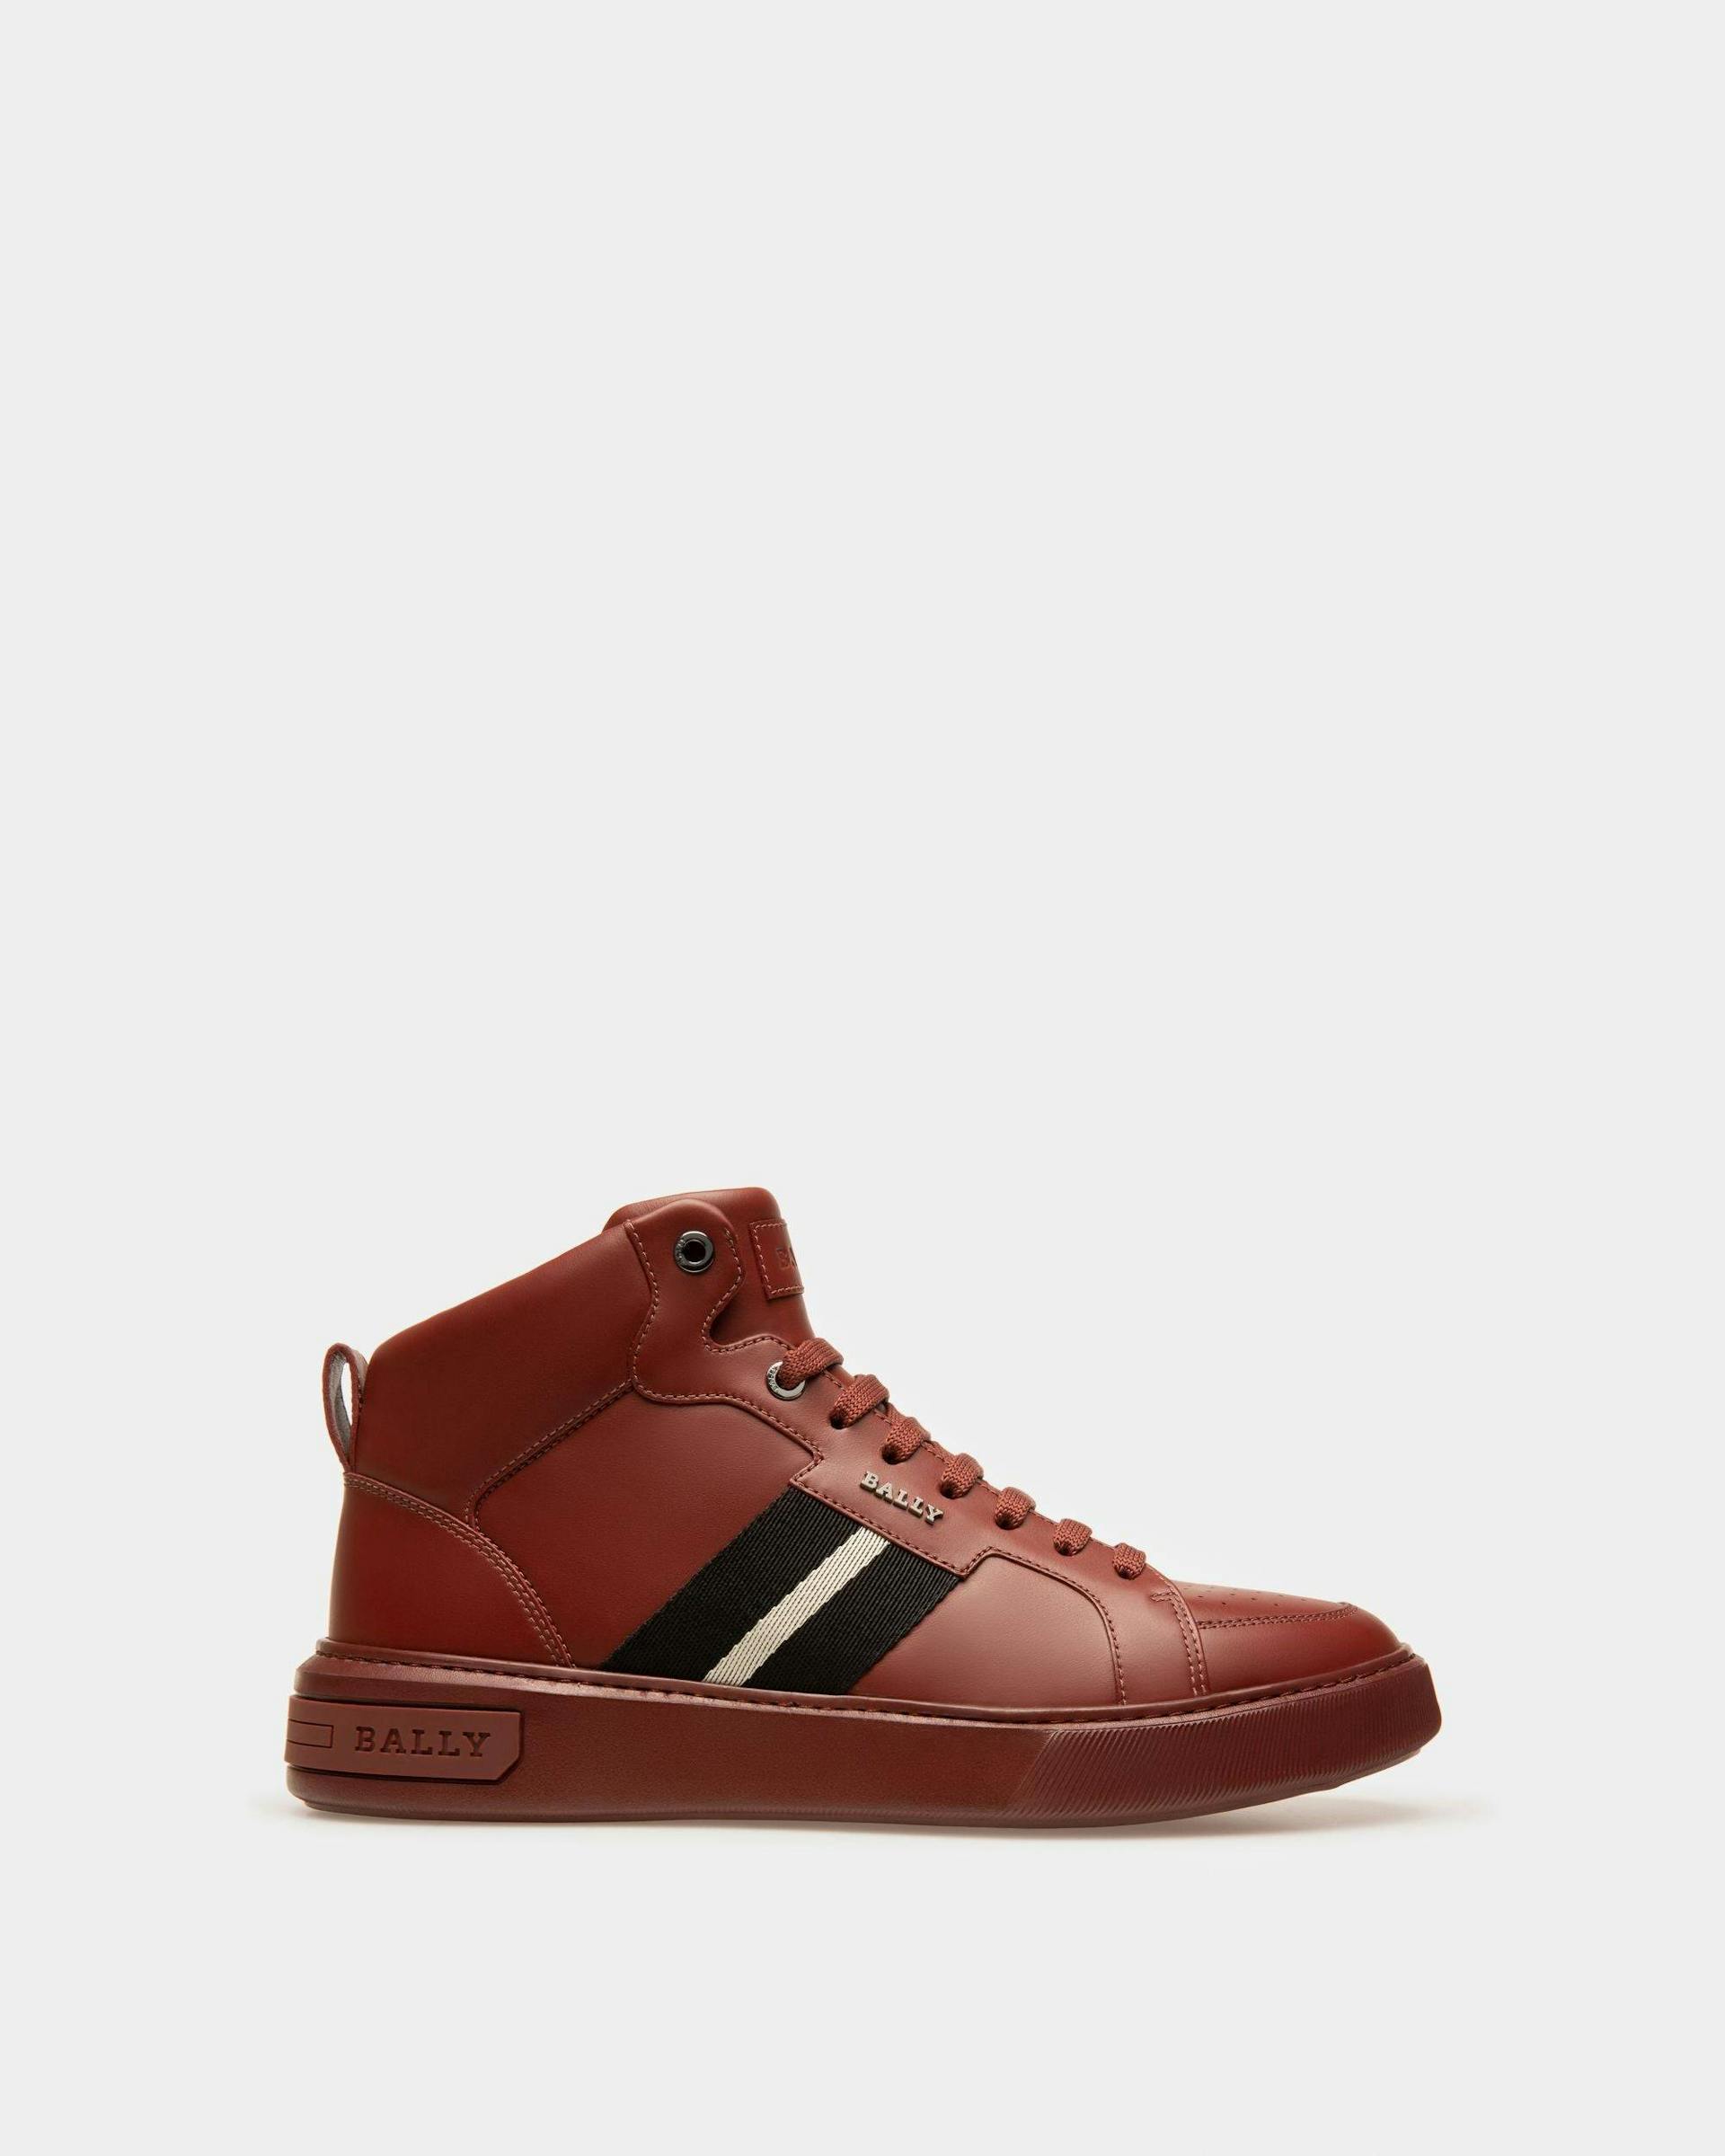 Myles Leather Sneakers In Heritage Red - Men's - Bally - 01